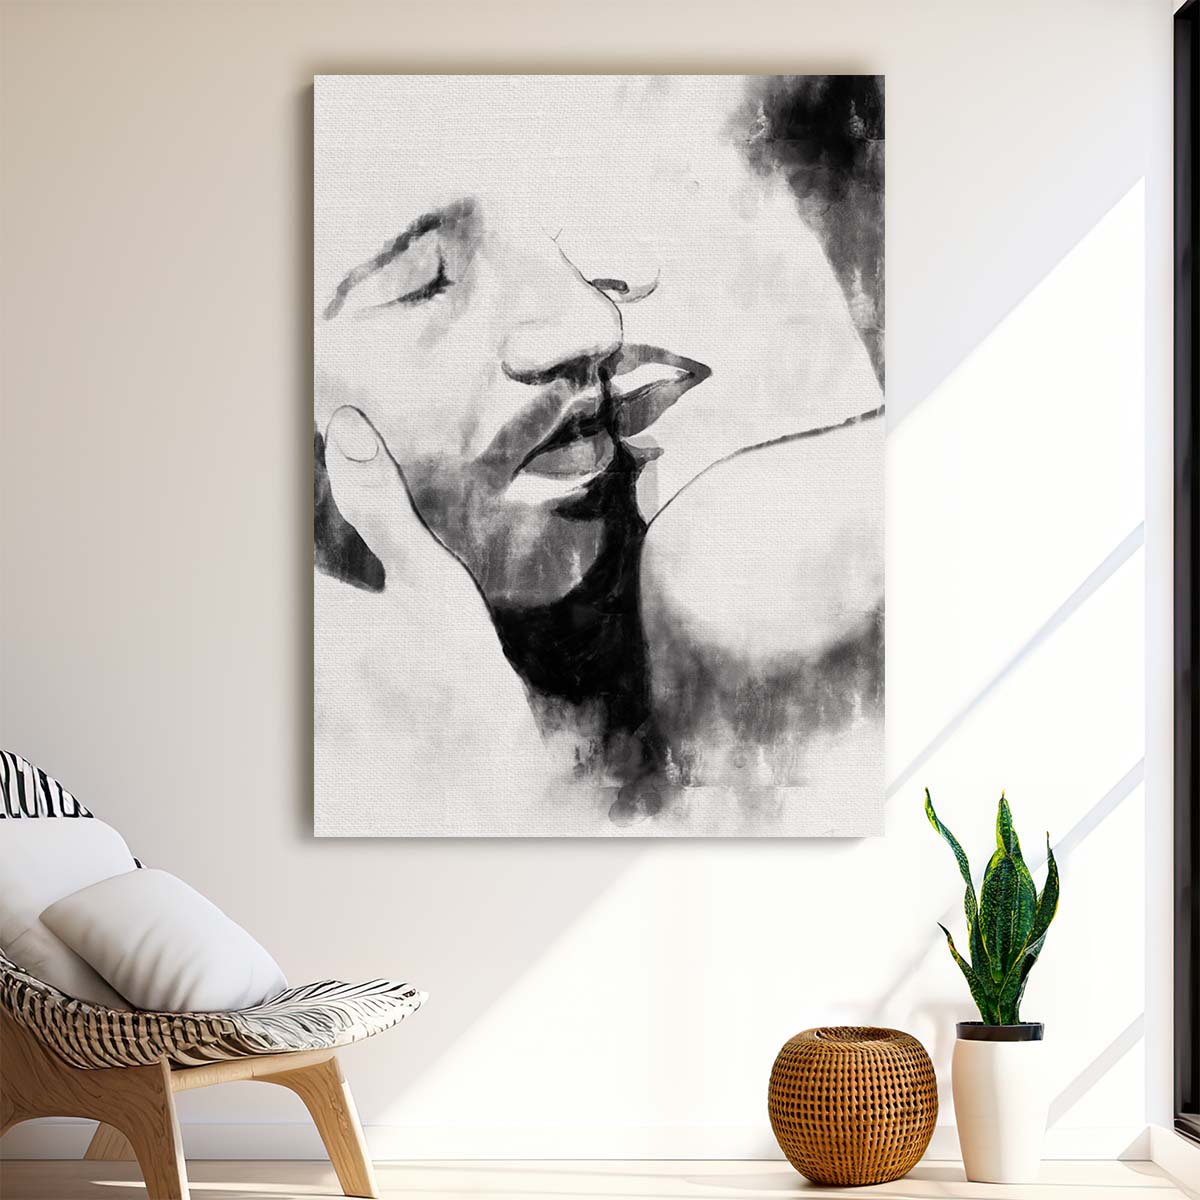 Romantic Kiss Illustration, Monochrome Watercolor Couple Art by Luxuriance Designs, made in USA